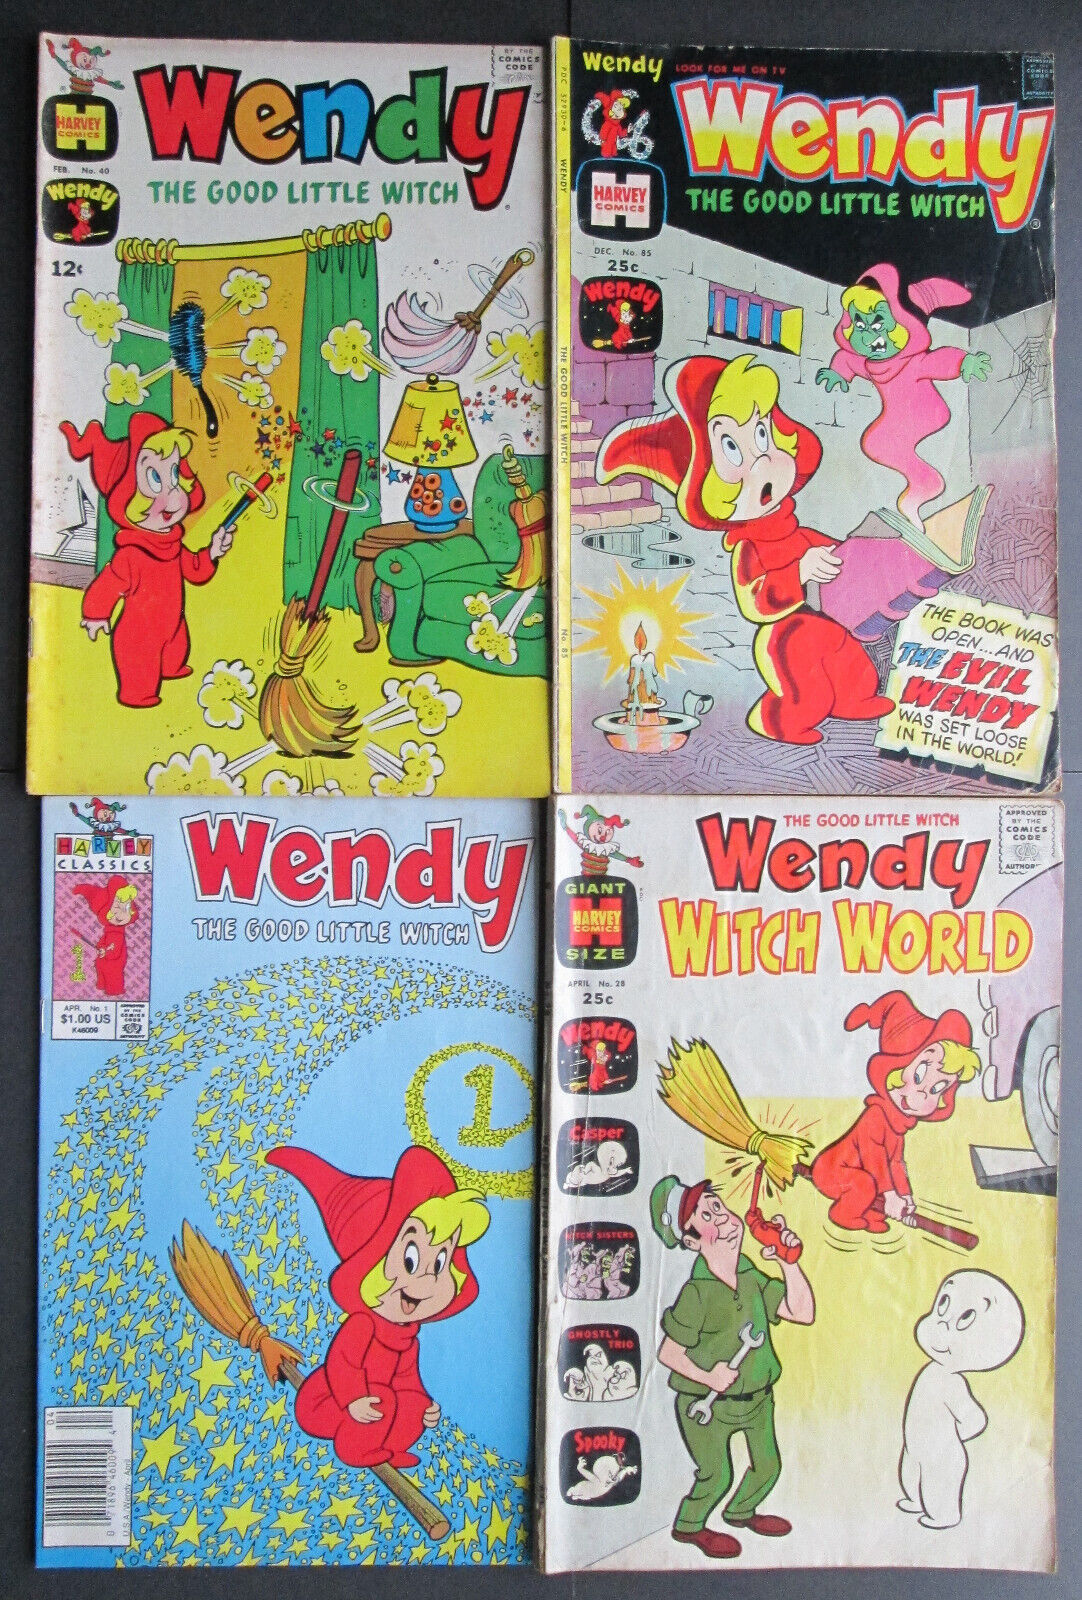 Wendy The Good Little Witch #1 (1991) 40 (1967) 85 (1974), Wendy Witch World #28